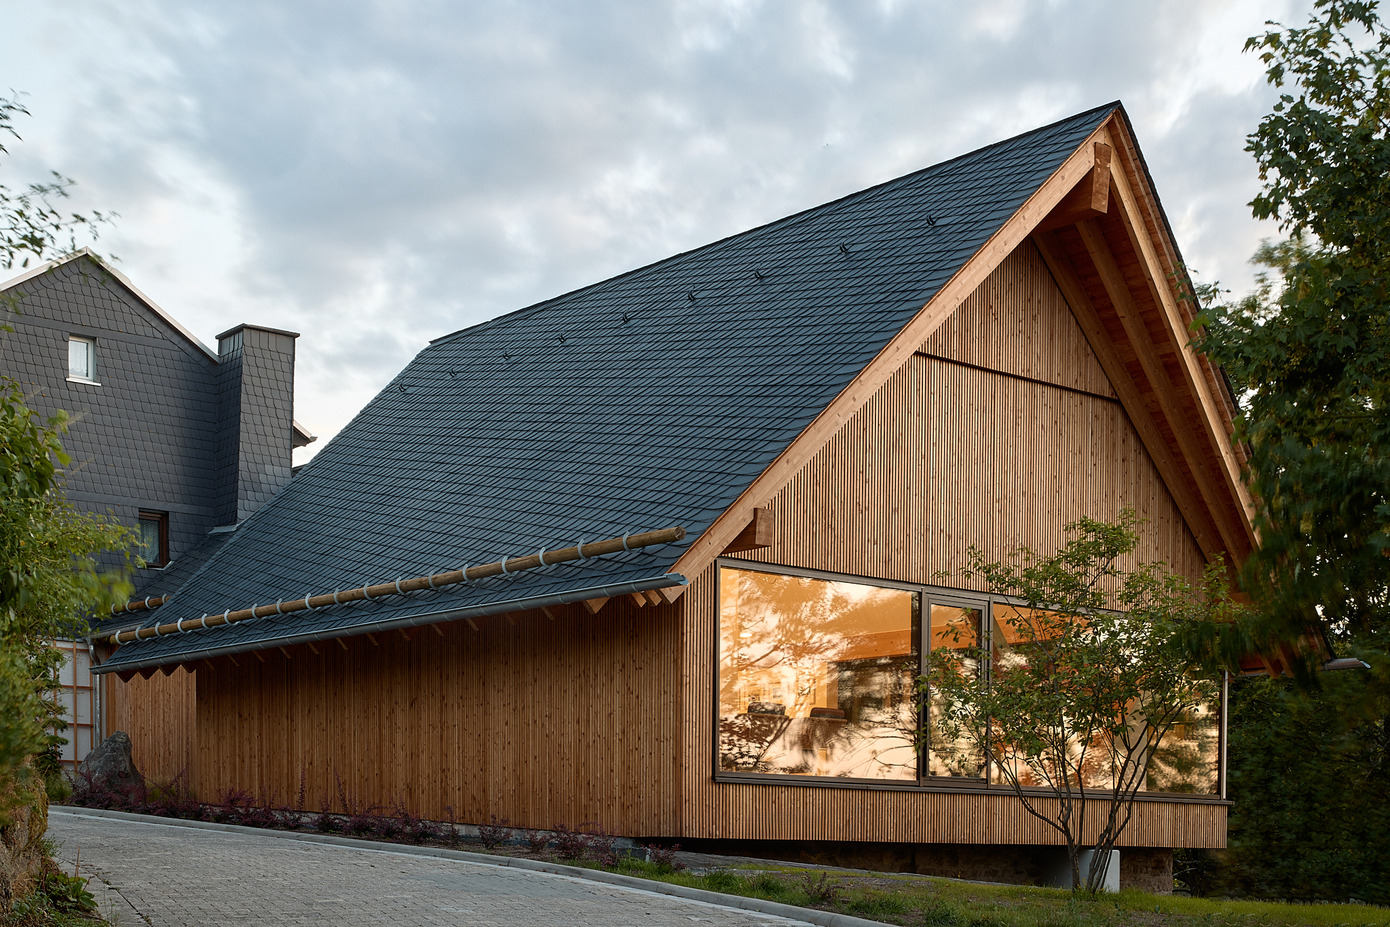 The Barn: A Fusion of Archaic Charm and Modern Design